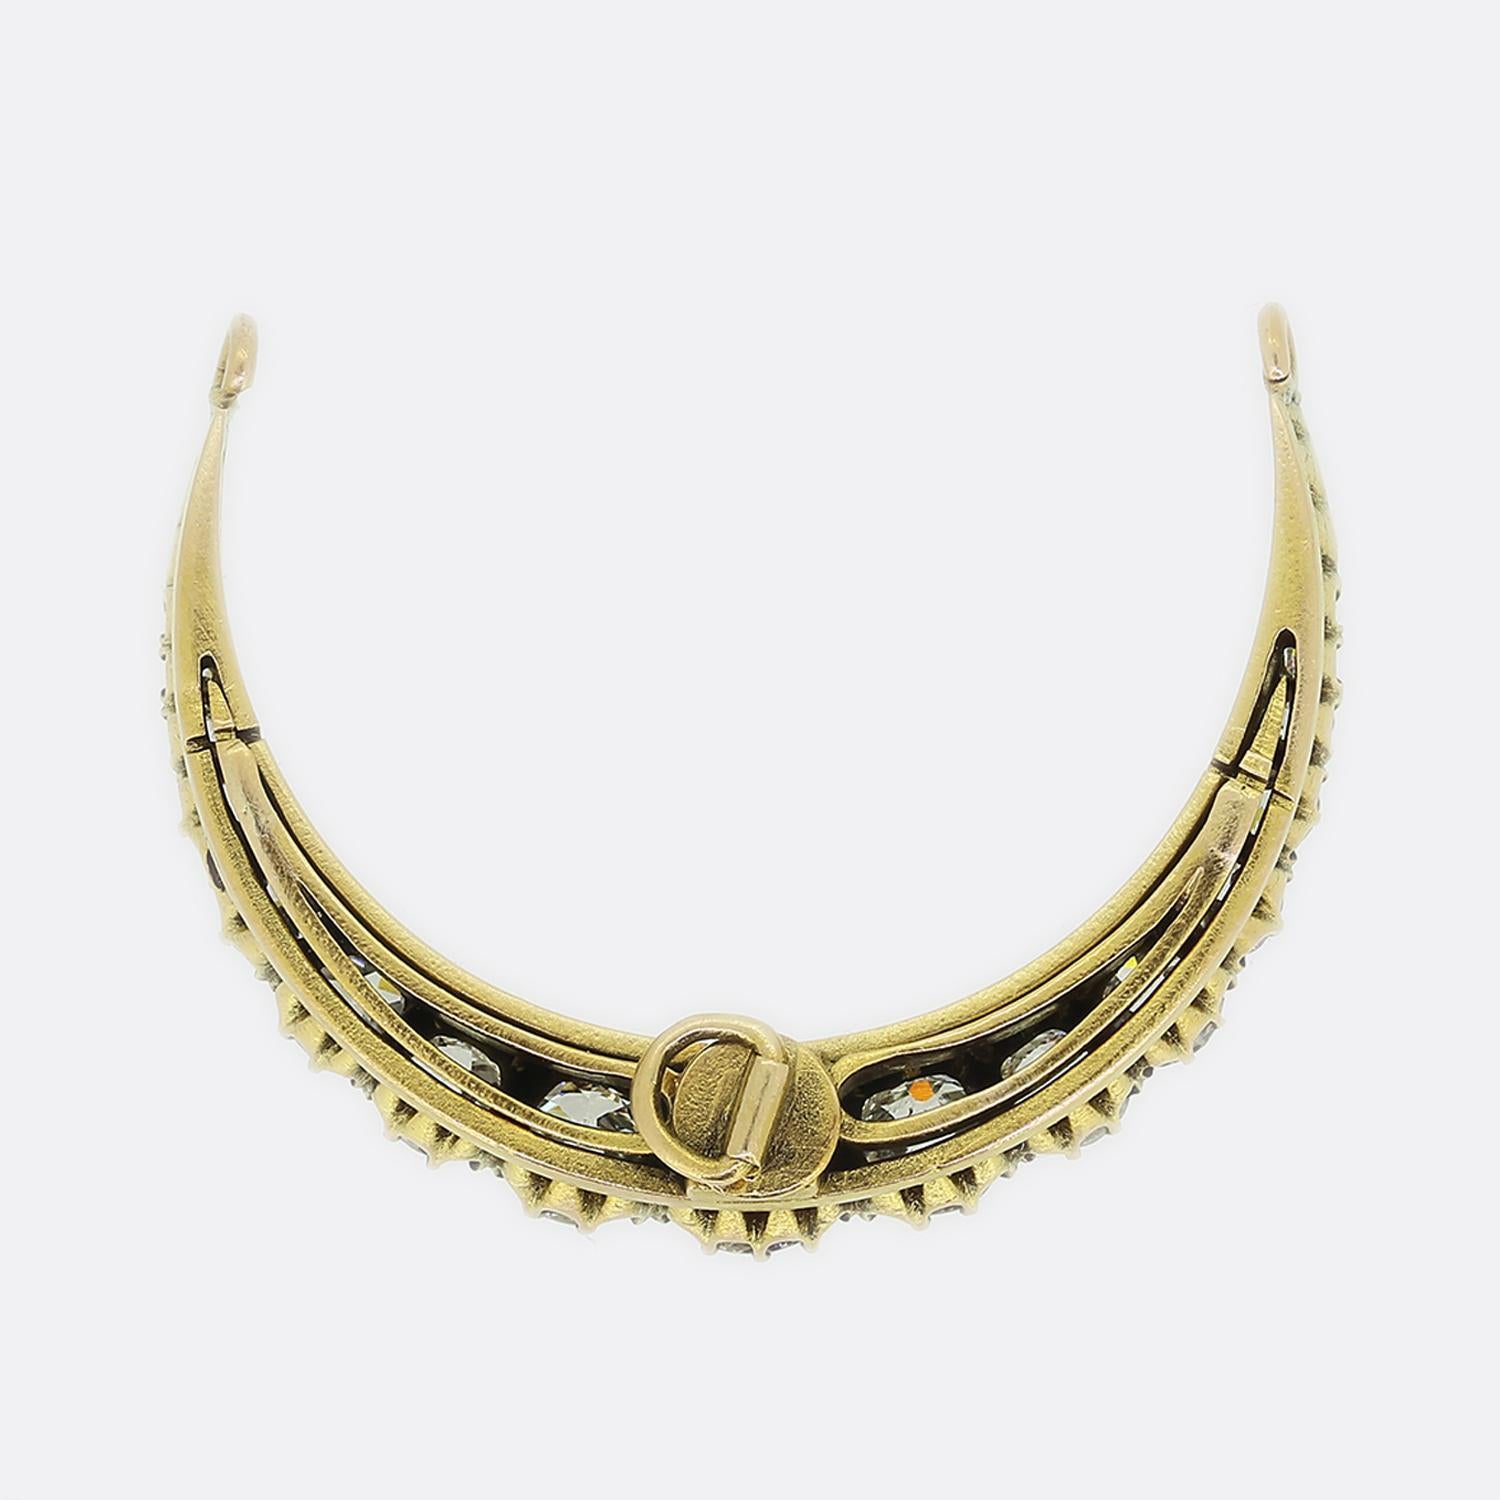 Here we have a charming crescent pendant. This antique piece has been crafted from a warm 15ct yellow gold and showcases a single row of round faceted old cut diamonds which graduate from rose cut diamond endings towards an impressive 0.50ct antique